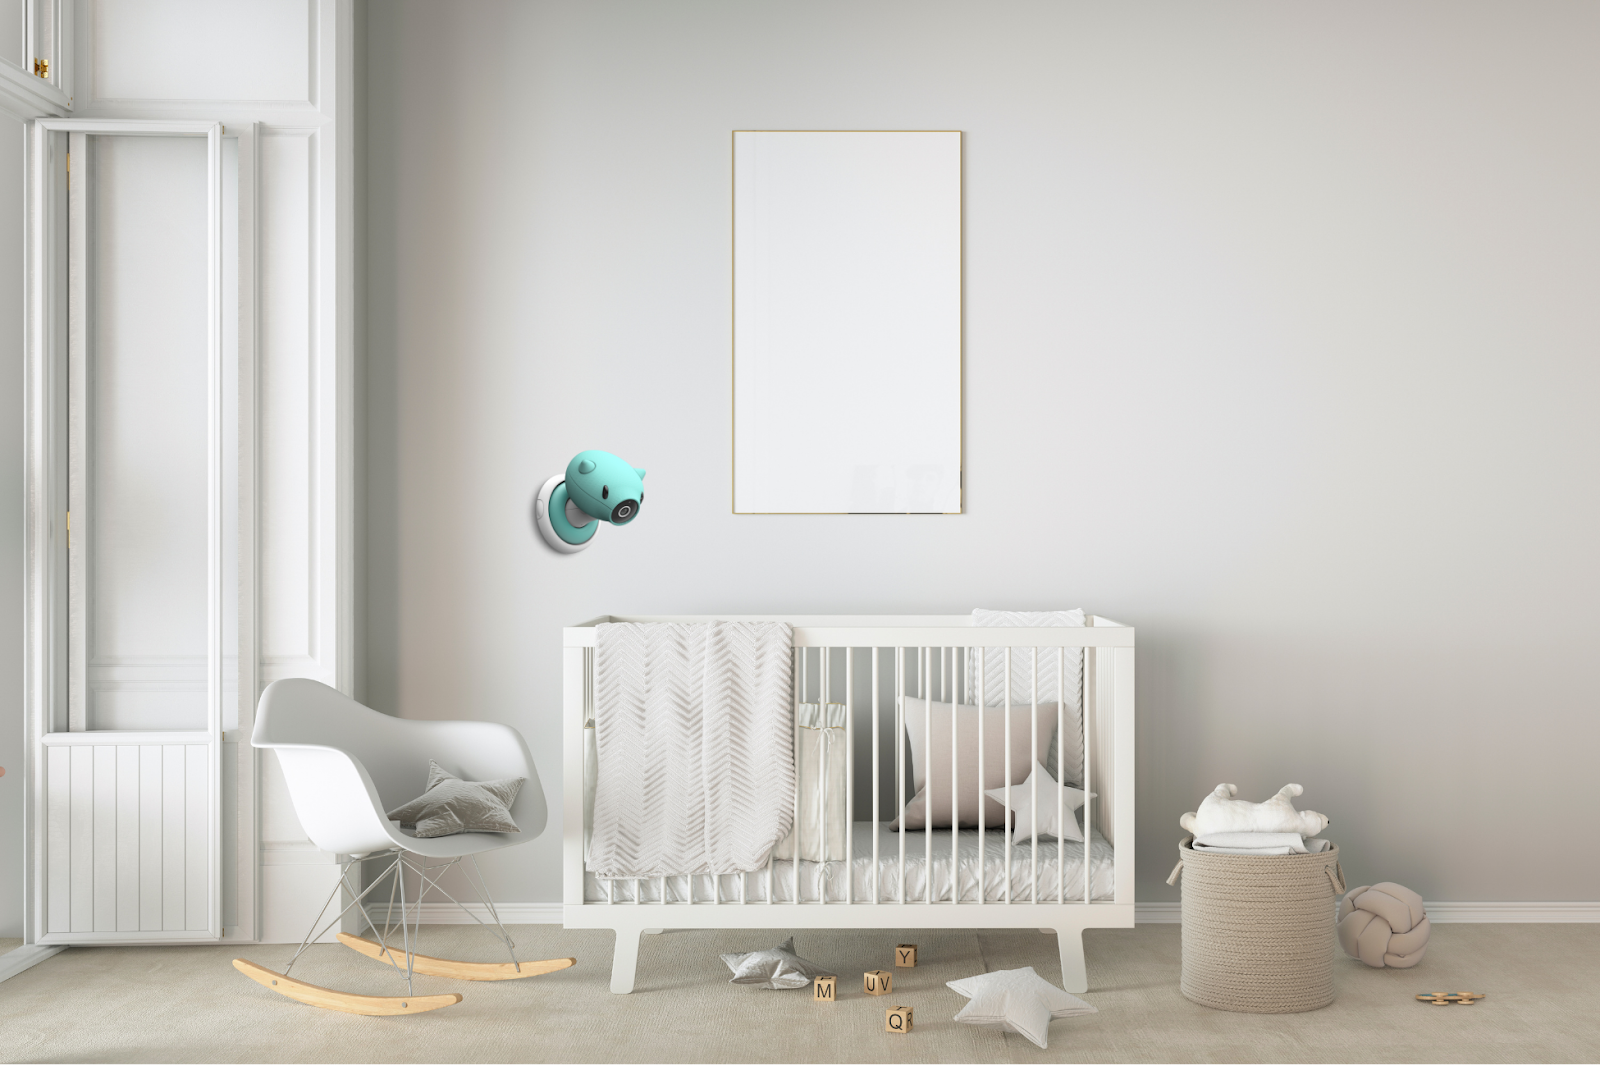 Adding the extras to your baby's nursery